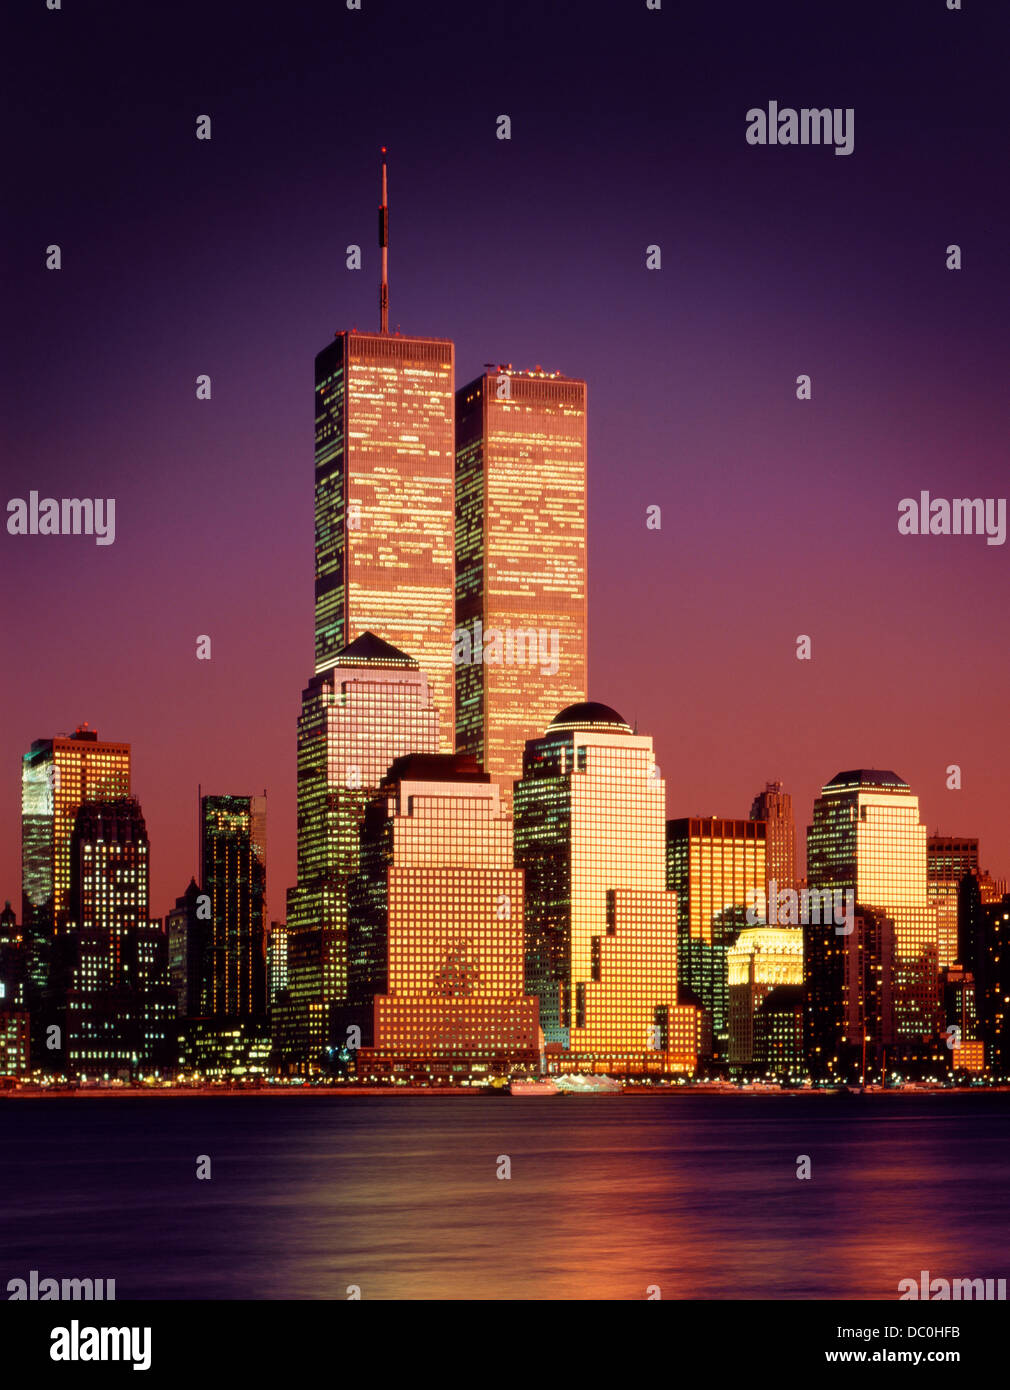 2000s NEW YORK CITY LOWER MANHATTAN SKYLINE AT NIGHT SHOWING WORLD TRADE CENTER BUILDINGS BEFORE SEPTEMBER 11 2001 ATTACK Stock Photo